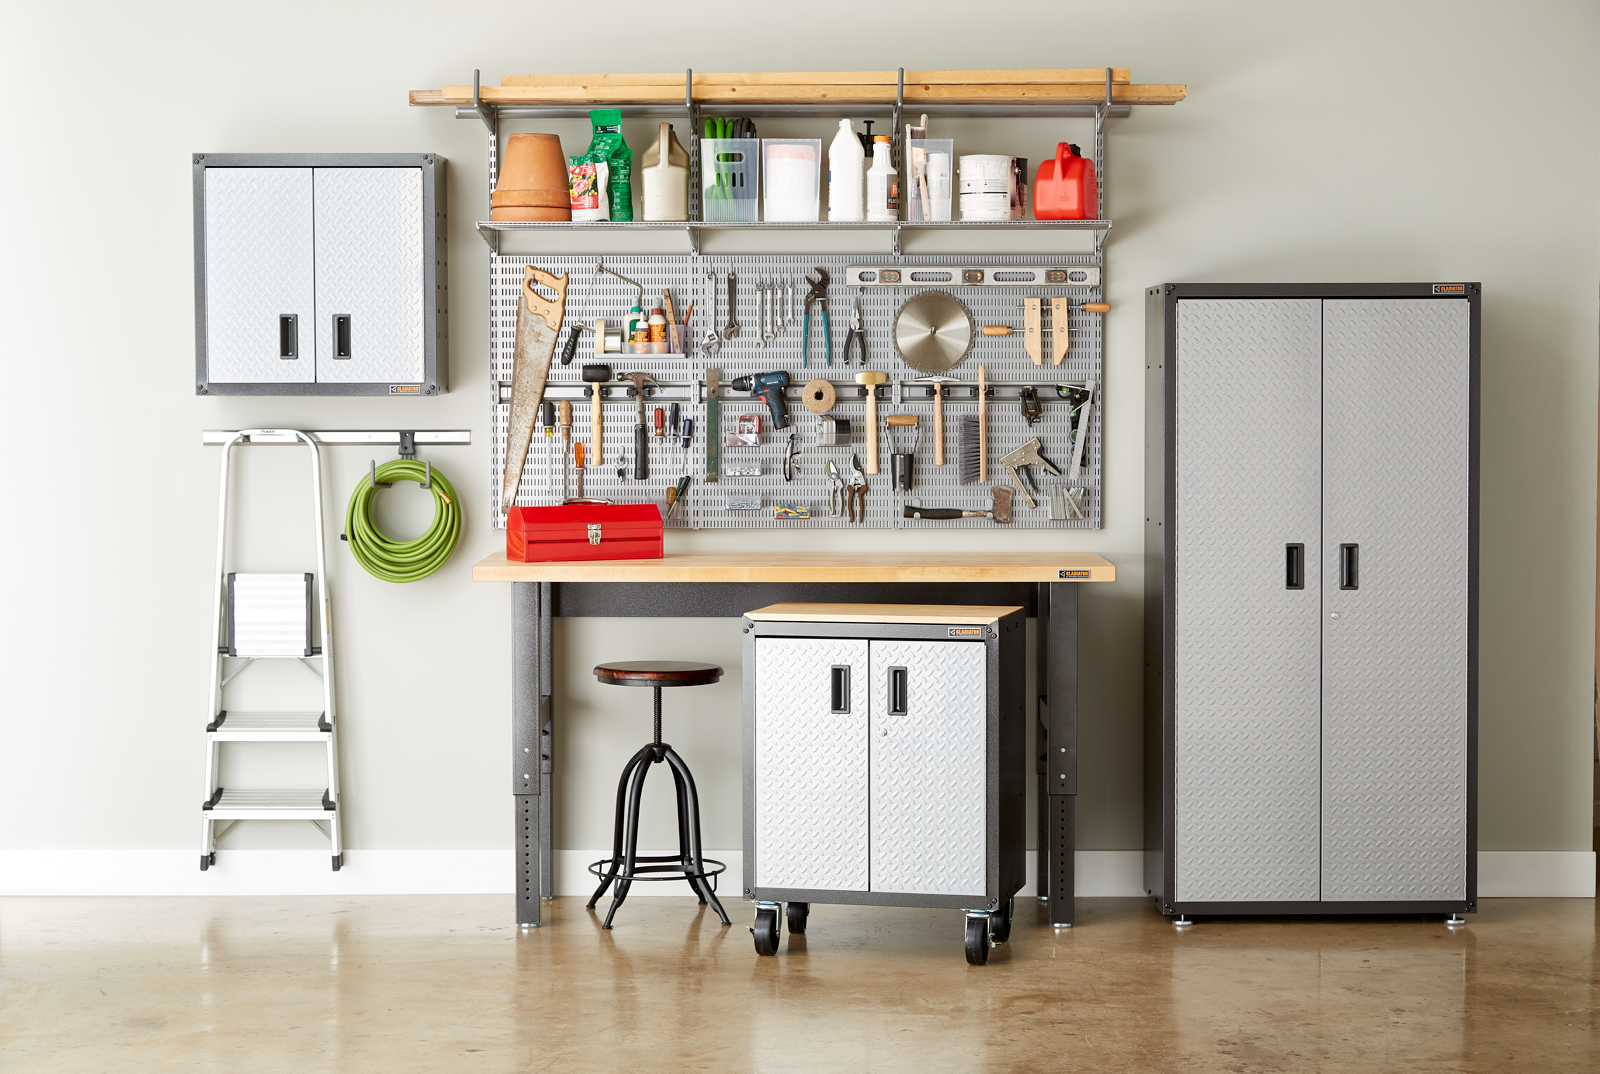 Gladiator's Smart Storage Solutions Can Organize Any Garage